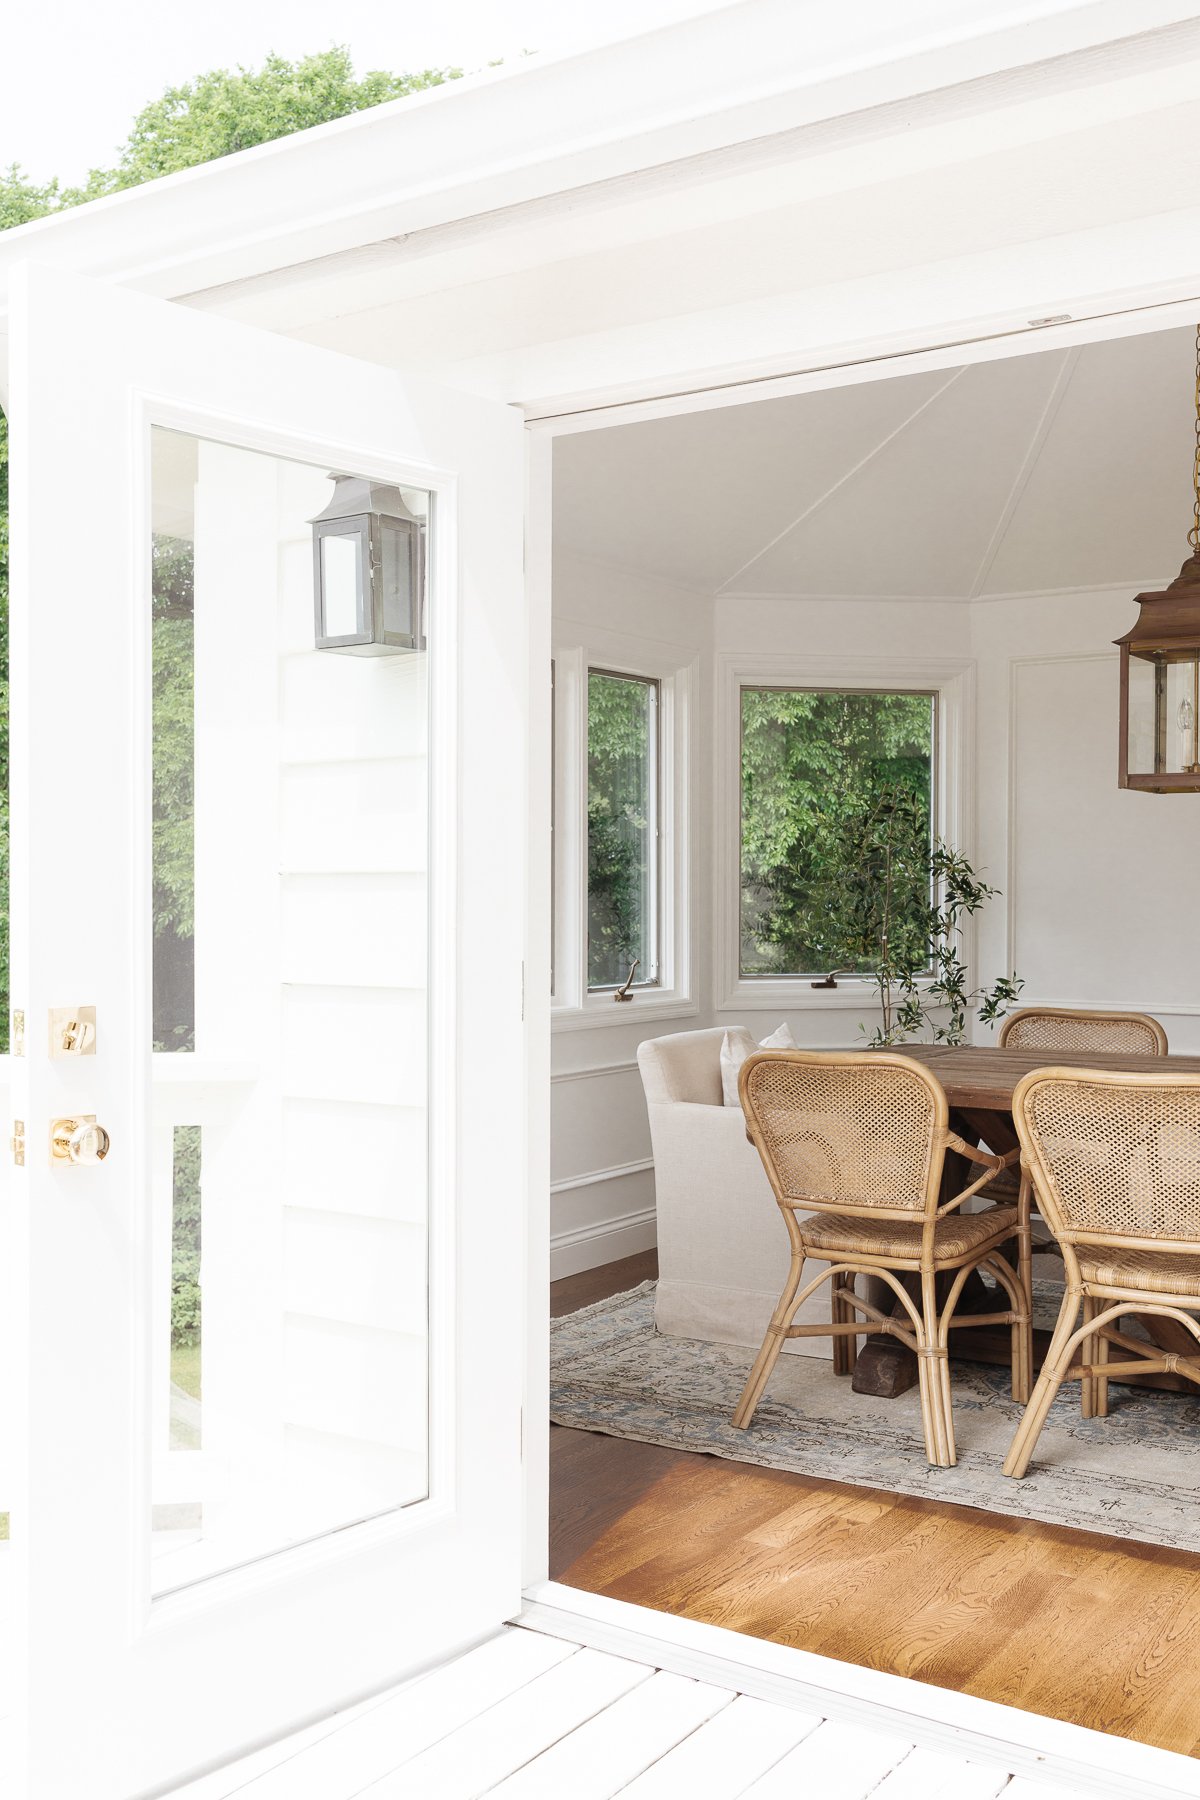 A white dining room space with moulding on the walls and a wood farm table.